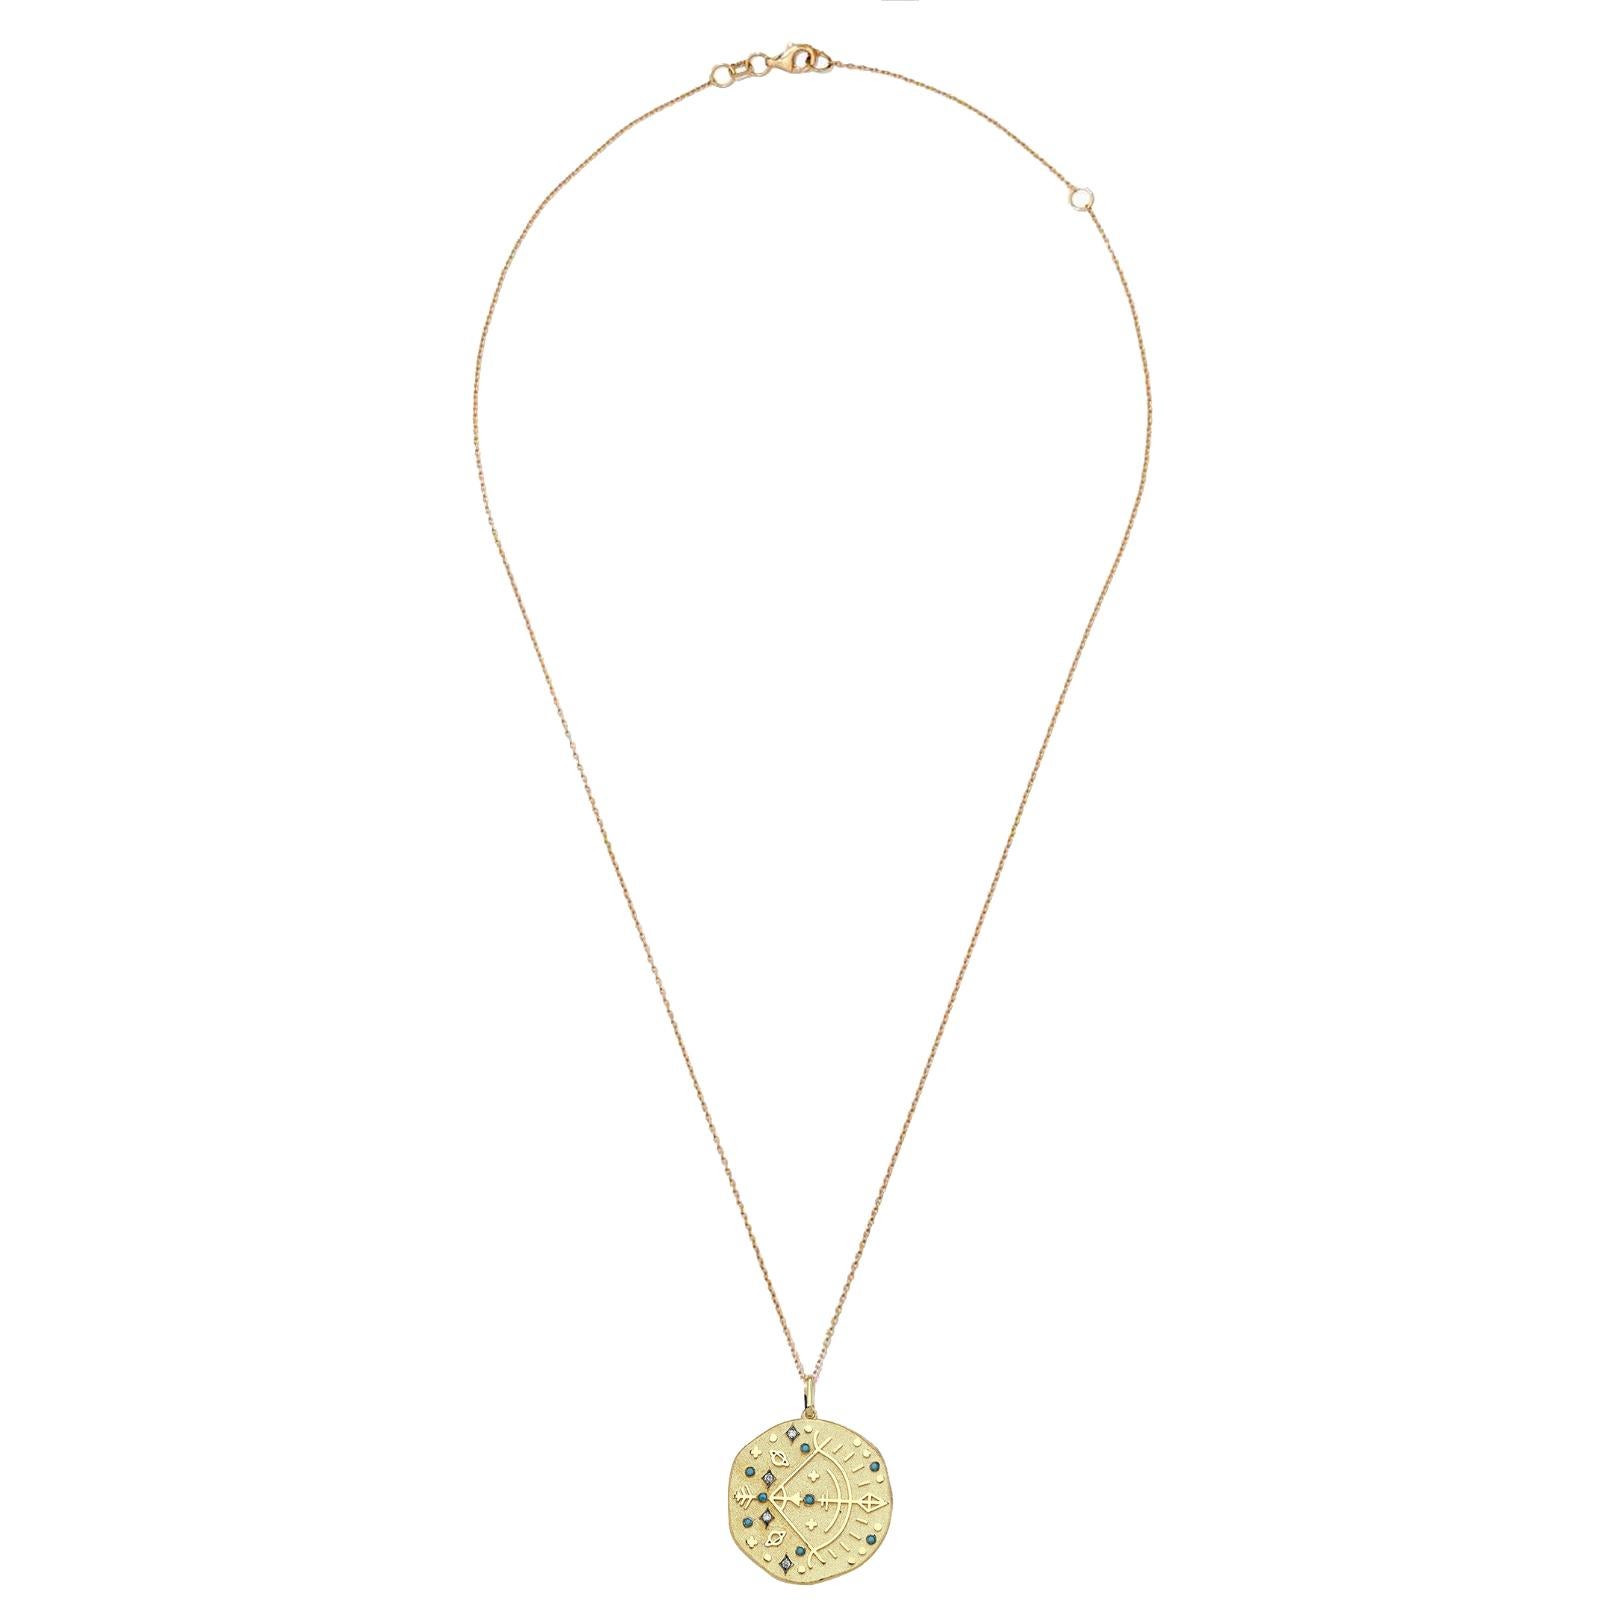 14 Karat Yellow Gold Necklaces Strung With Handcrafted Medallions Illustrating Twelve Horoscope Signs.
The Customized Symbol With Brilliant-Cut Diamonds And An Auspicious Birthstone Believed To Protect And Bring Luck To Its Wearer. Allow This